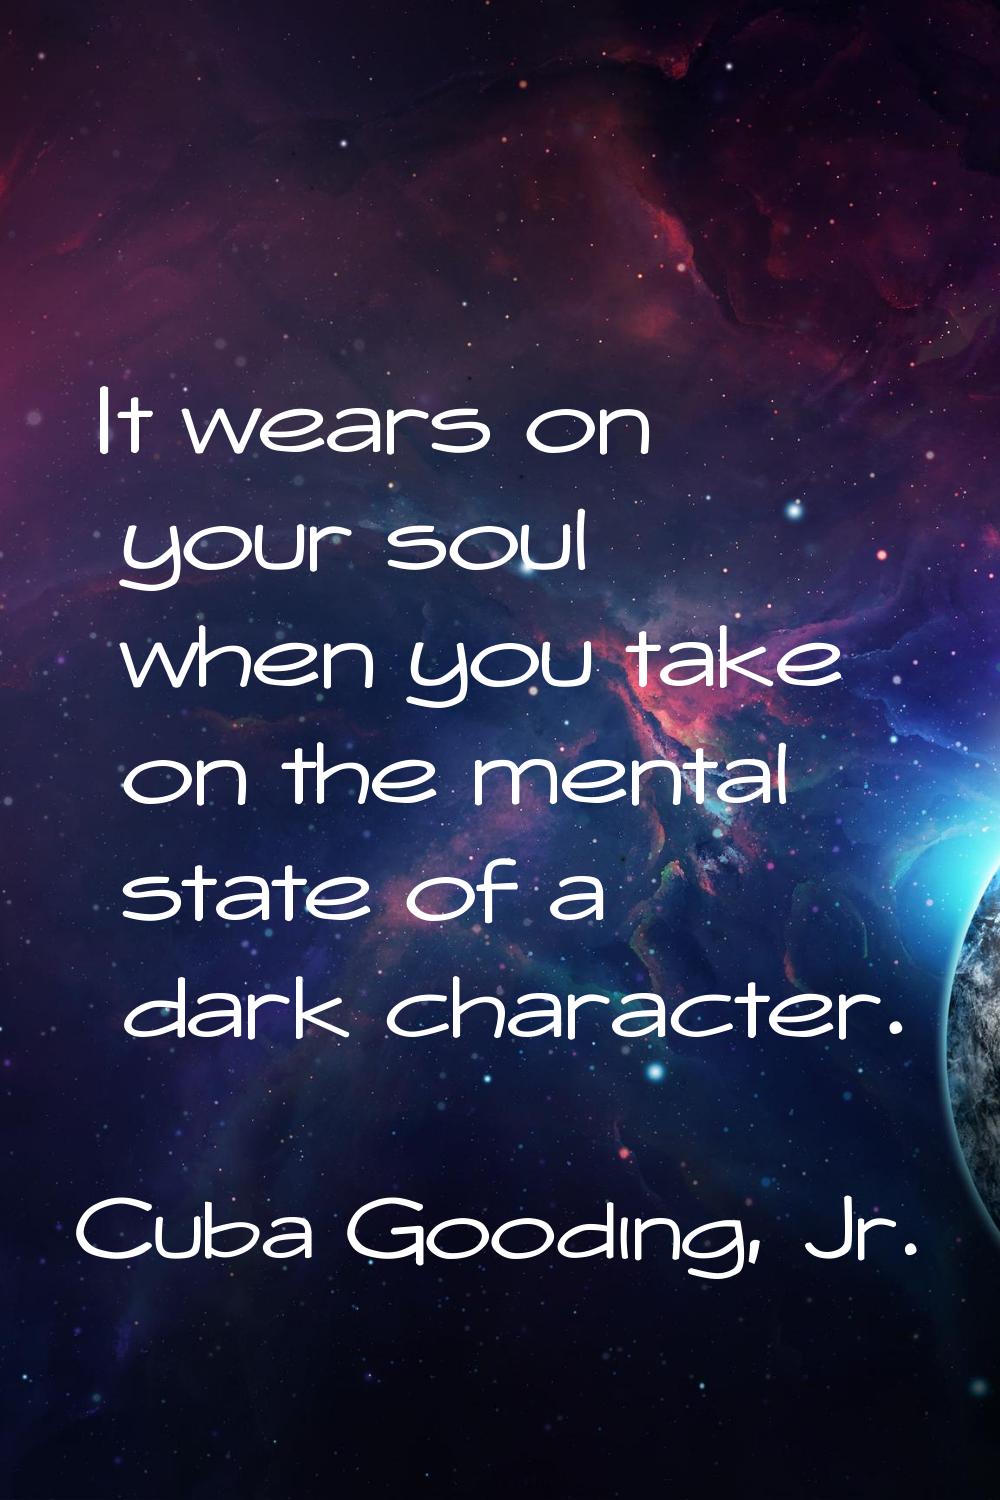 It wears on your soul when you take on the mental state of a dark character.